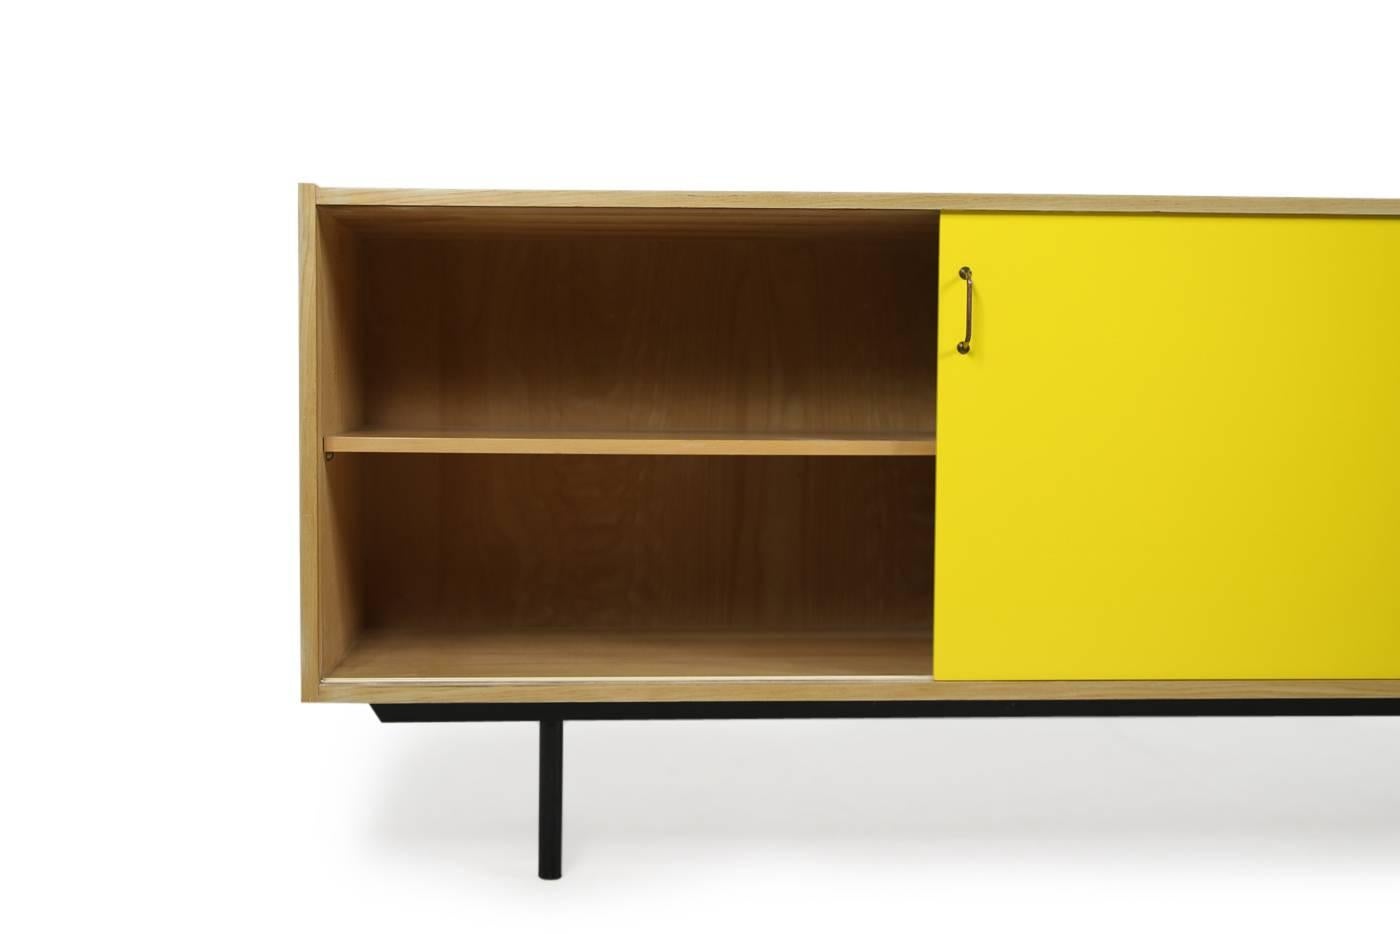 Beautiful and super rare Mid-Century Modern sideboard, 1950s Minimalist design, metal legs, yellow and white painted sliding doors with brass handles, four drawers, fantastic condition. Most likely a custom work or made to order object, never saw it